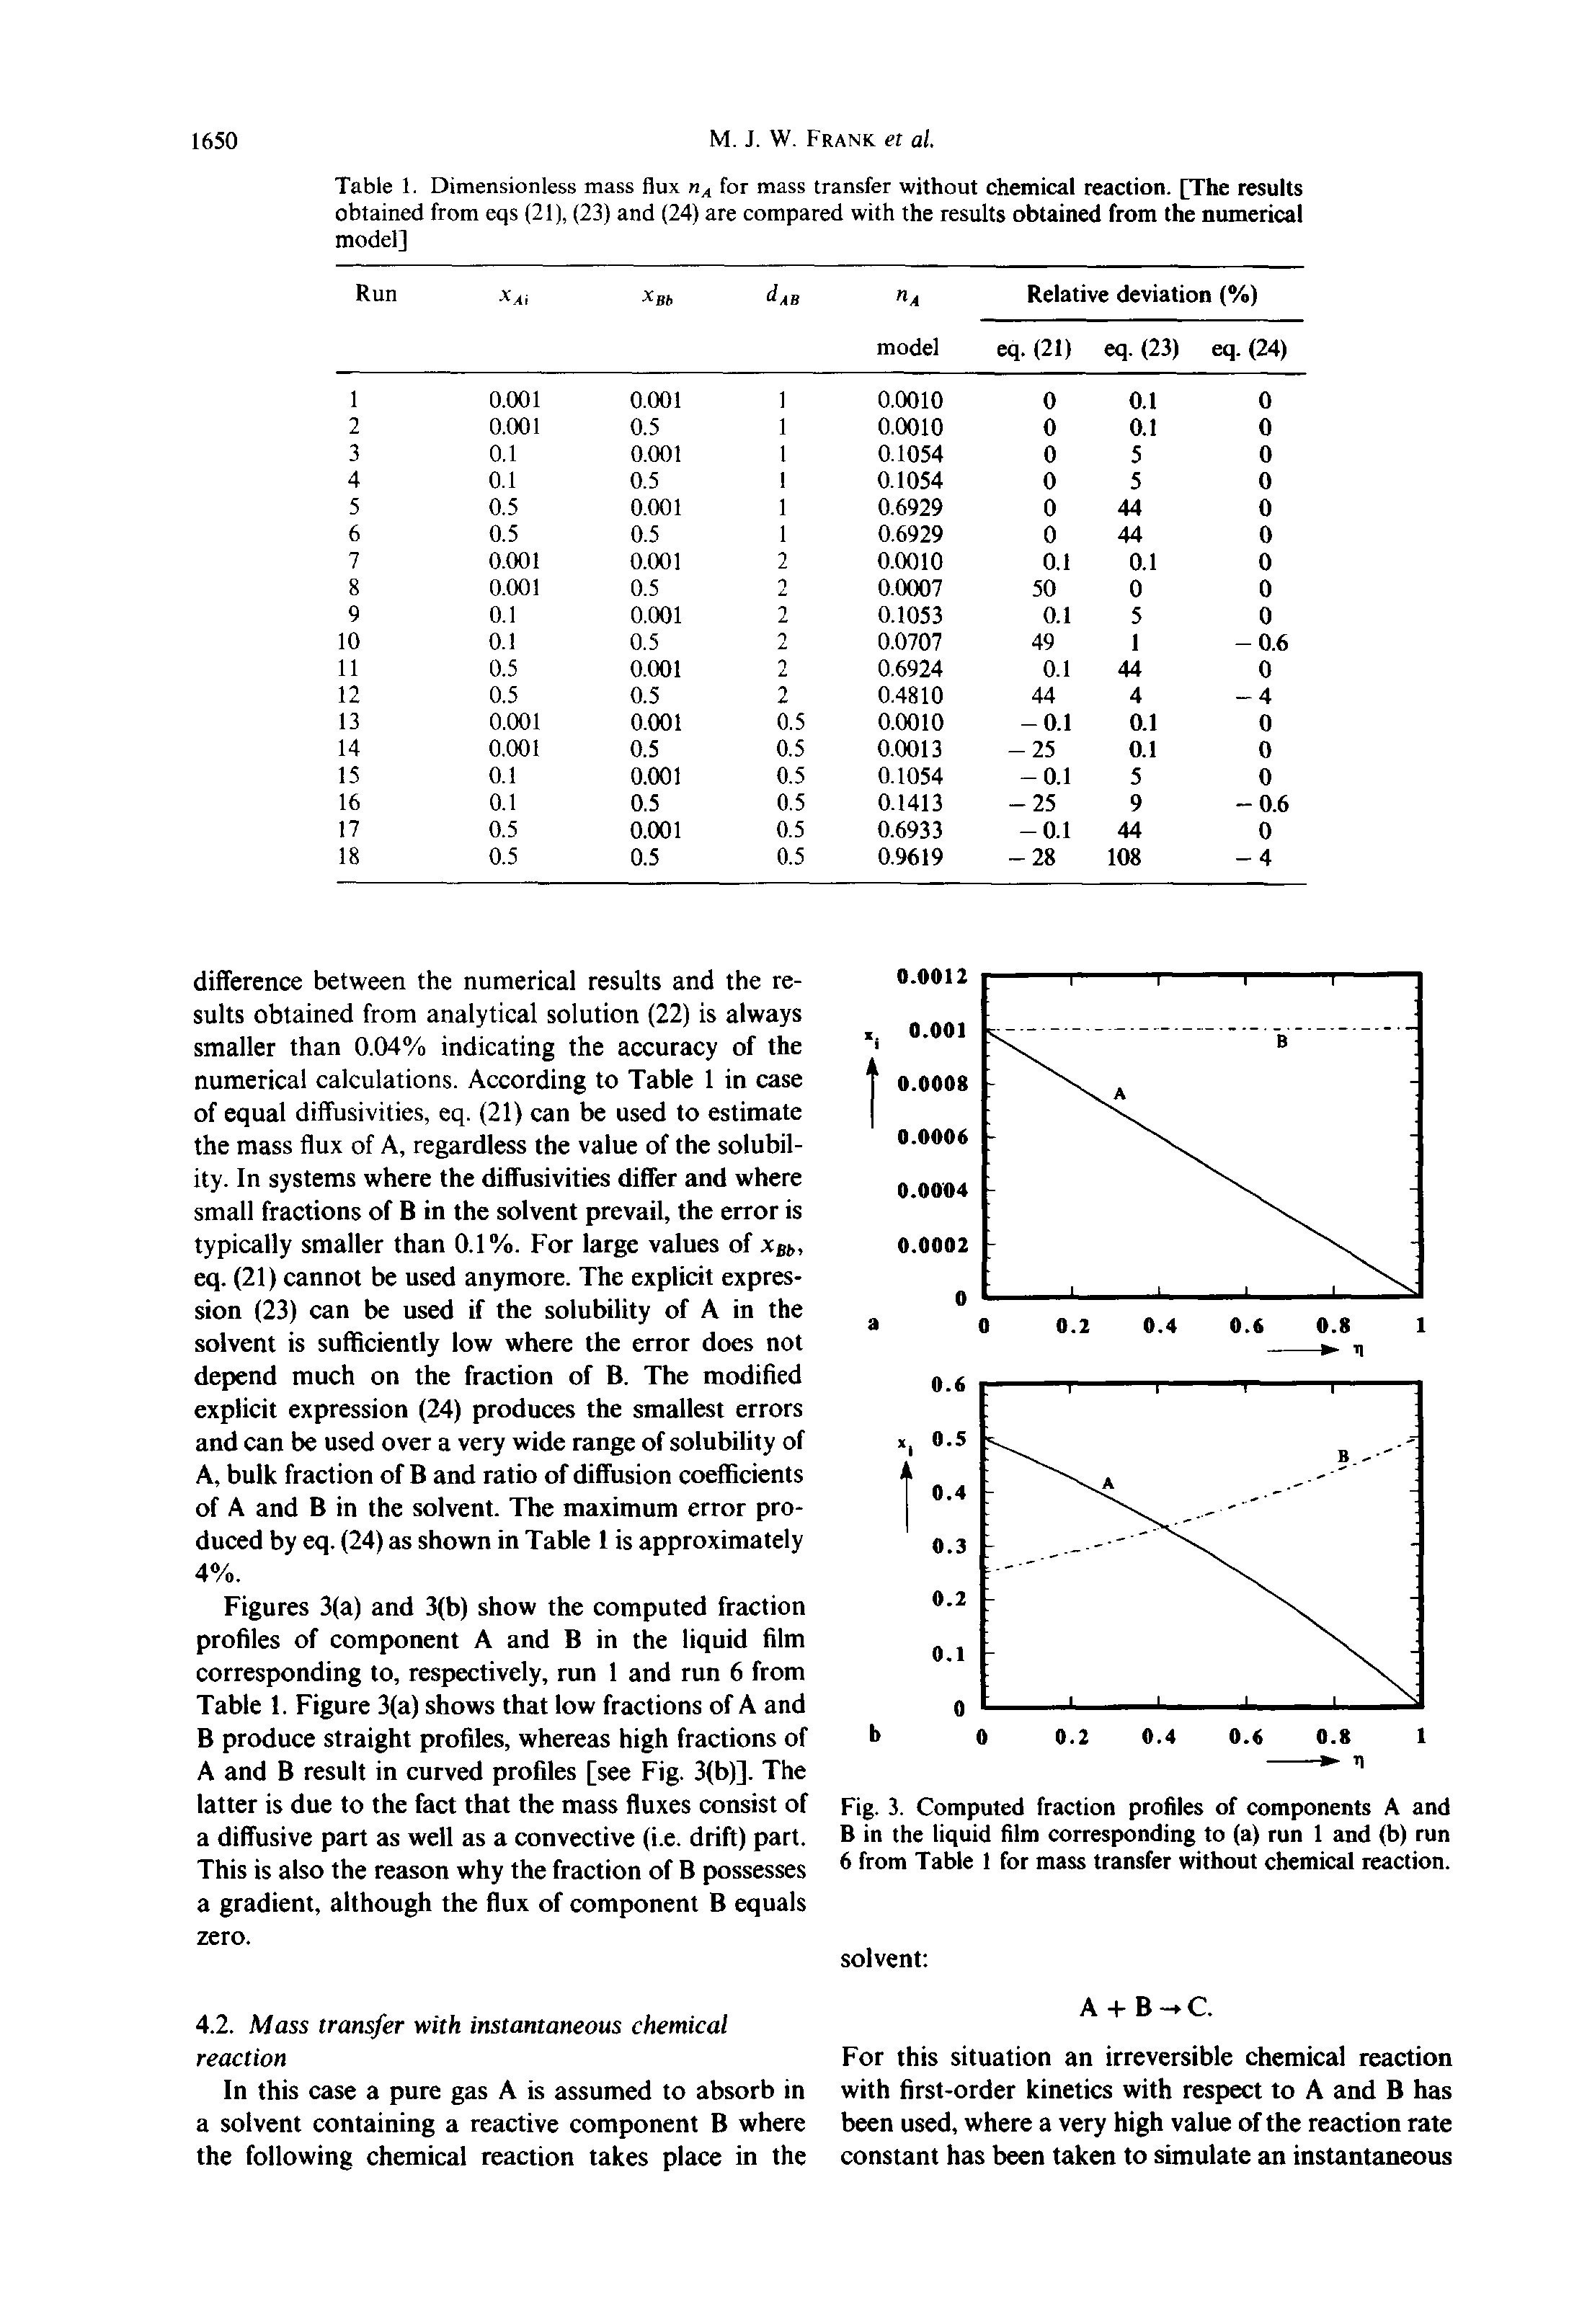 Figures 3(a) and 3(b) show the computed fraction profiles of component A and B in the liquid film corresponding to, respectively, run 1 and run 6 from Table 1. Figure 3(a) shows that low fractions of A and B produce straight profiles, whereas high fractions of A and B result in curved profiles [see Fig. 3(b)]. The latter is due to the fact that the mass fluxes consist of a diffusive part as well as a convective (i.e. drift) part. This is also the reason why the fraction of B possesses a gradient, although the flux of component B equals zero.